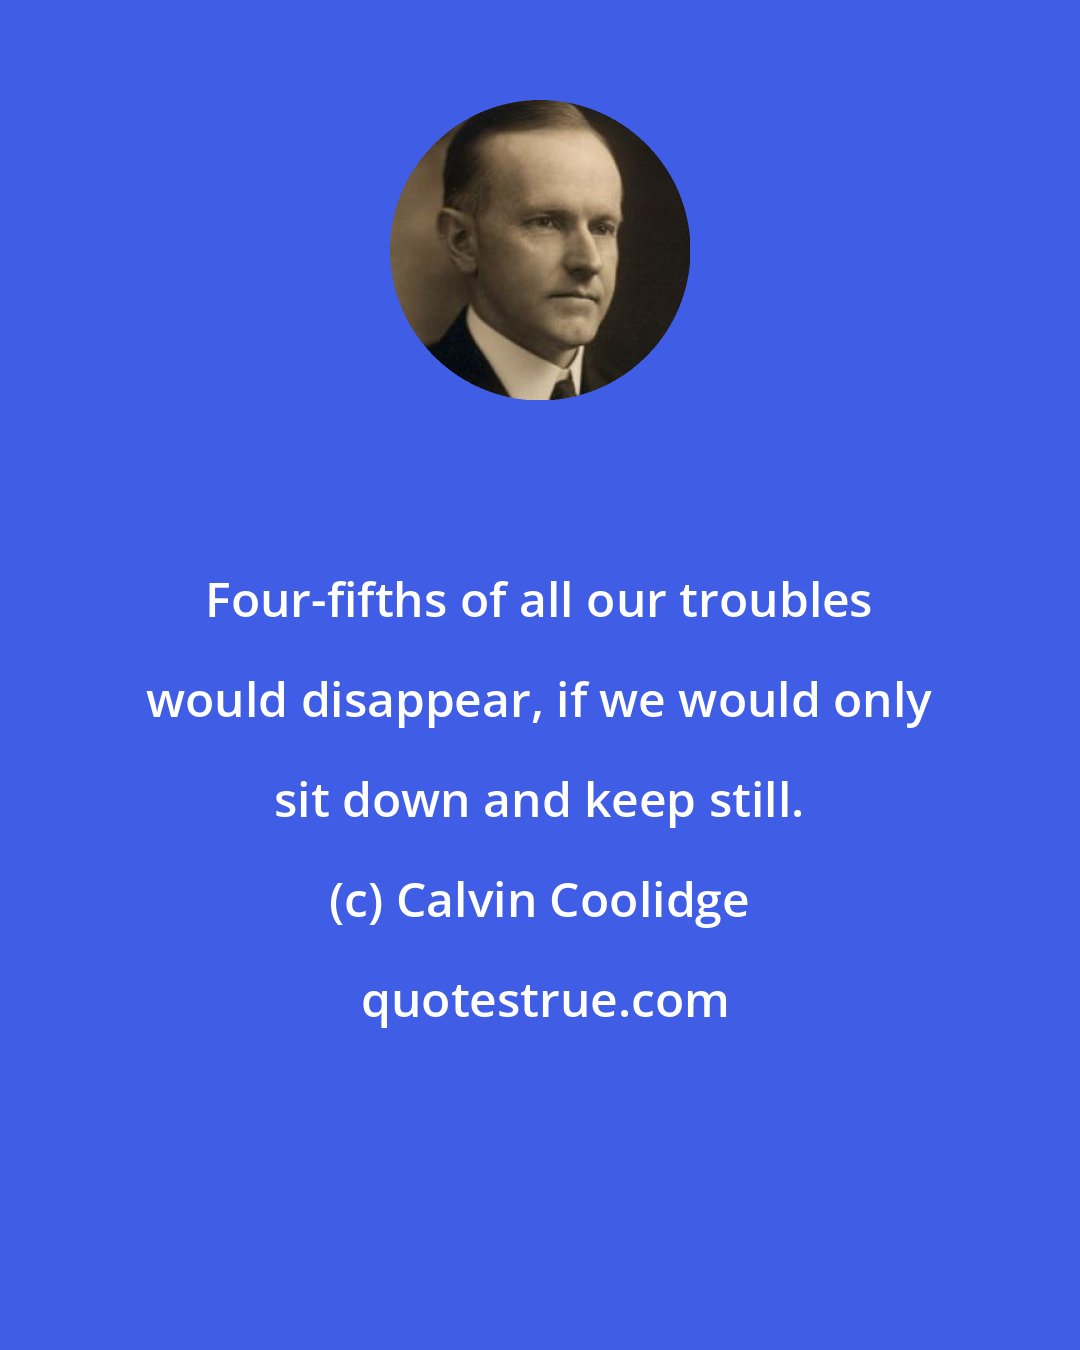 Calvin Coolidge: Four-fifths of all our troubles would disappear, if we would only sit down and keep still.